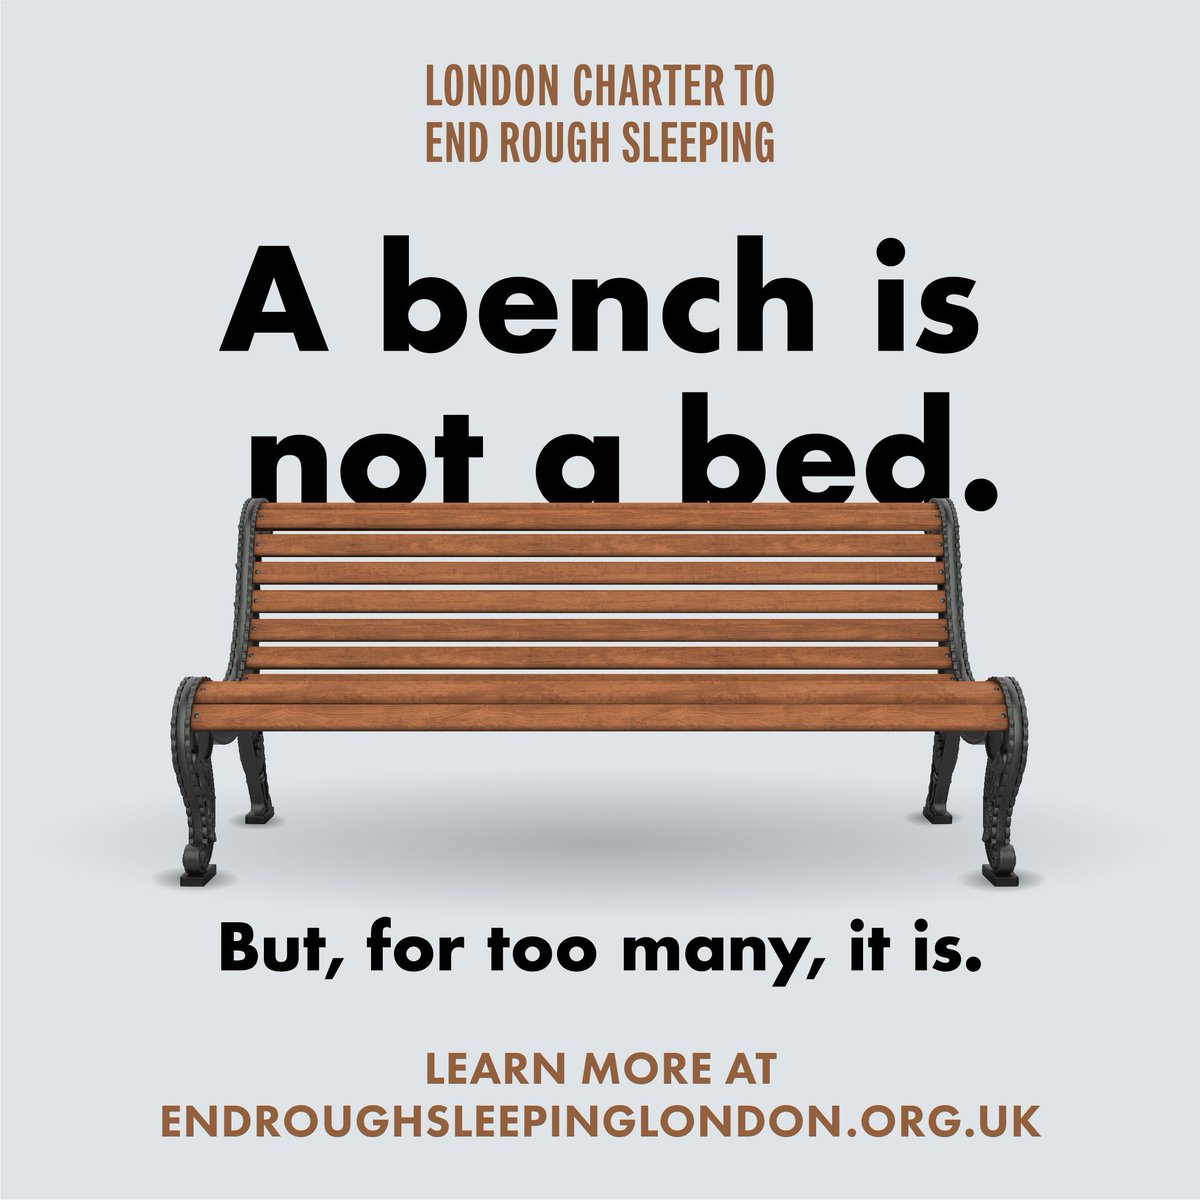 The London Charter to End Rough Sleeping is a powerful commitment to tackle homelessness. Be part of the change. Sign the charter, spread the word, and let's create a future where no one sleeps on the streets. #LondonChartertoEndRoughSleeping #EndRoughSleeping'